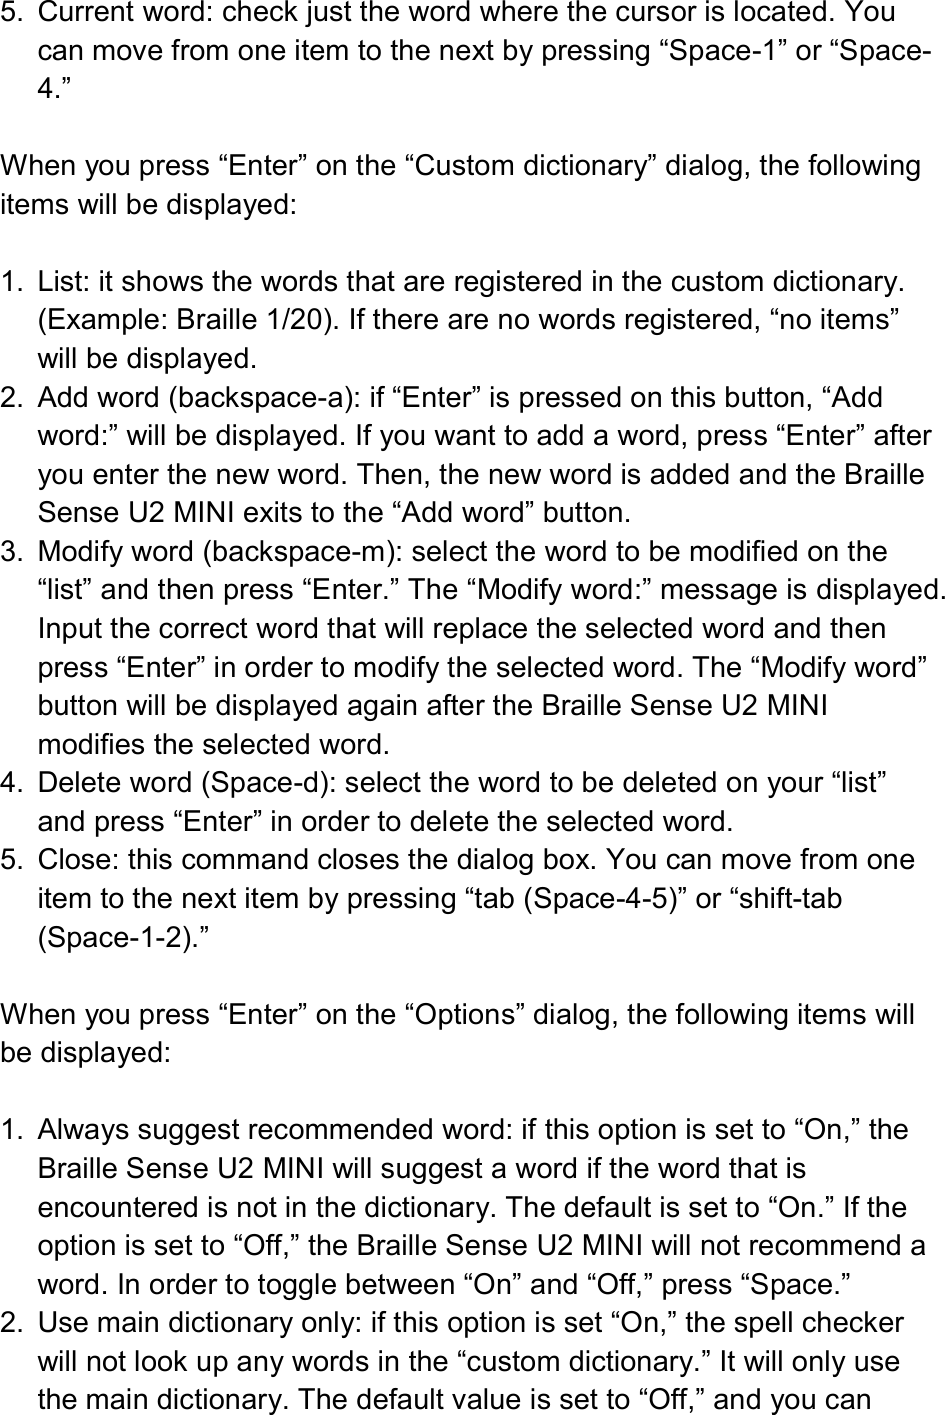  5.  Current word: check just the word where the cursor is located. You can move from one item to the next by pressing “Space-1” or “Space-4.”  When you press “Enter” on the “Custom dictionary” dialog, the following items will be displayed:  1.  List: it shows the words that are registered in the custom dictionary. (Example: Braille 1/20). If there are no words registered, “no items” will be displayed. 2.  Add word (backspace-a): if “Enter” is pressed on this button, “Add word:” will be displayed. If you want to add a word, press “Enter” after you enter the new word. Then, the new word is added and the Braille Sense U2 MINI exits to the “Add word” button. 3.  Modify word (backspace-m): select the word to be modified on the “list” and then press “Enter.” The “Modify word:” message is displayed. Input the correct word that will replace the selected word and then press “Enter” in order to modify the selected word. The “Modify word” button will be displayed again after the Braille Sense U2 MINI modifies the selected word. 4.  Delete word (Space-d): select the word to be deleted on your “list” and press “Enter” in order to delete the selected word. 5.  Close: this command closes the dialog box. You can move from one item to the next item by pressing “tab (Space-4-5)” or “shift-tab (Space-1-2).”  When you press “Enter” on the “Options” dialog, the following items will be displayed:  1.  Always suggest recommended word: if this option is set to “On,” the Braille Sense U2 MINI will suggest a word if the word that is encountered is not in the dictionary. The default is set to “On.” If the option is set to “Off,” the Braille Sense U2 MINI will not recommend a word. In order to toggle between “On” and “Off,” press “Space.” 2.  Use main dictionary only: if this option is set “On,” the spell checker will not look up any words in the “custom dictionary.” It will only use the main dictionary. The default value is set to “Off,” and you can 